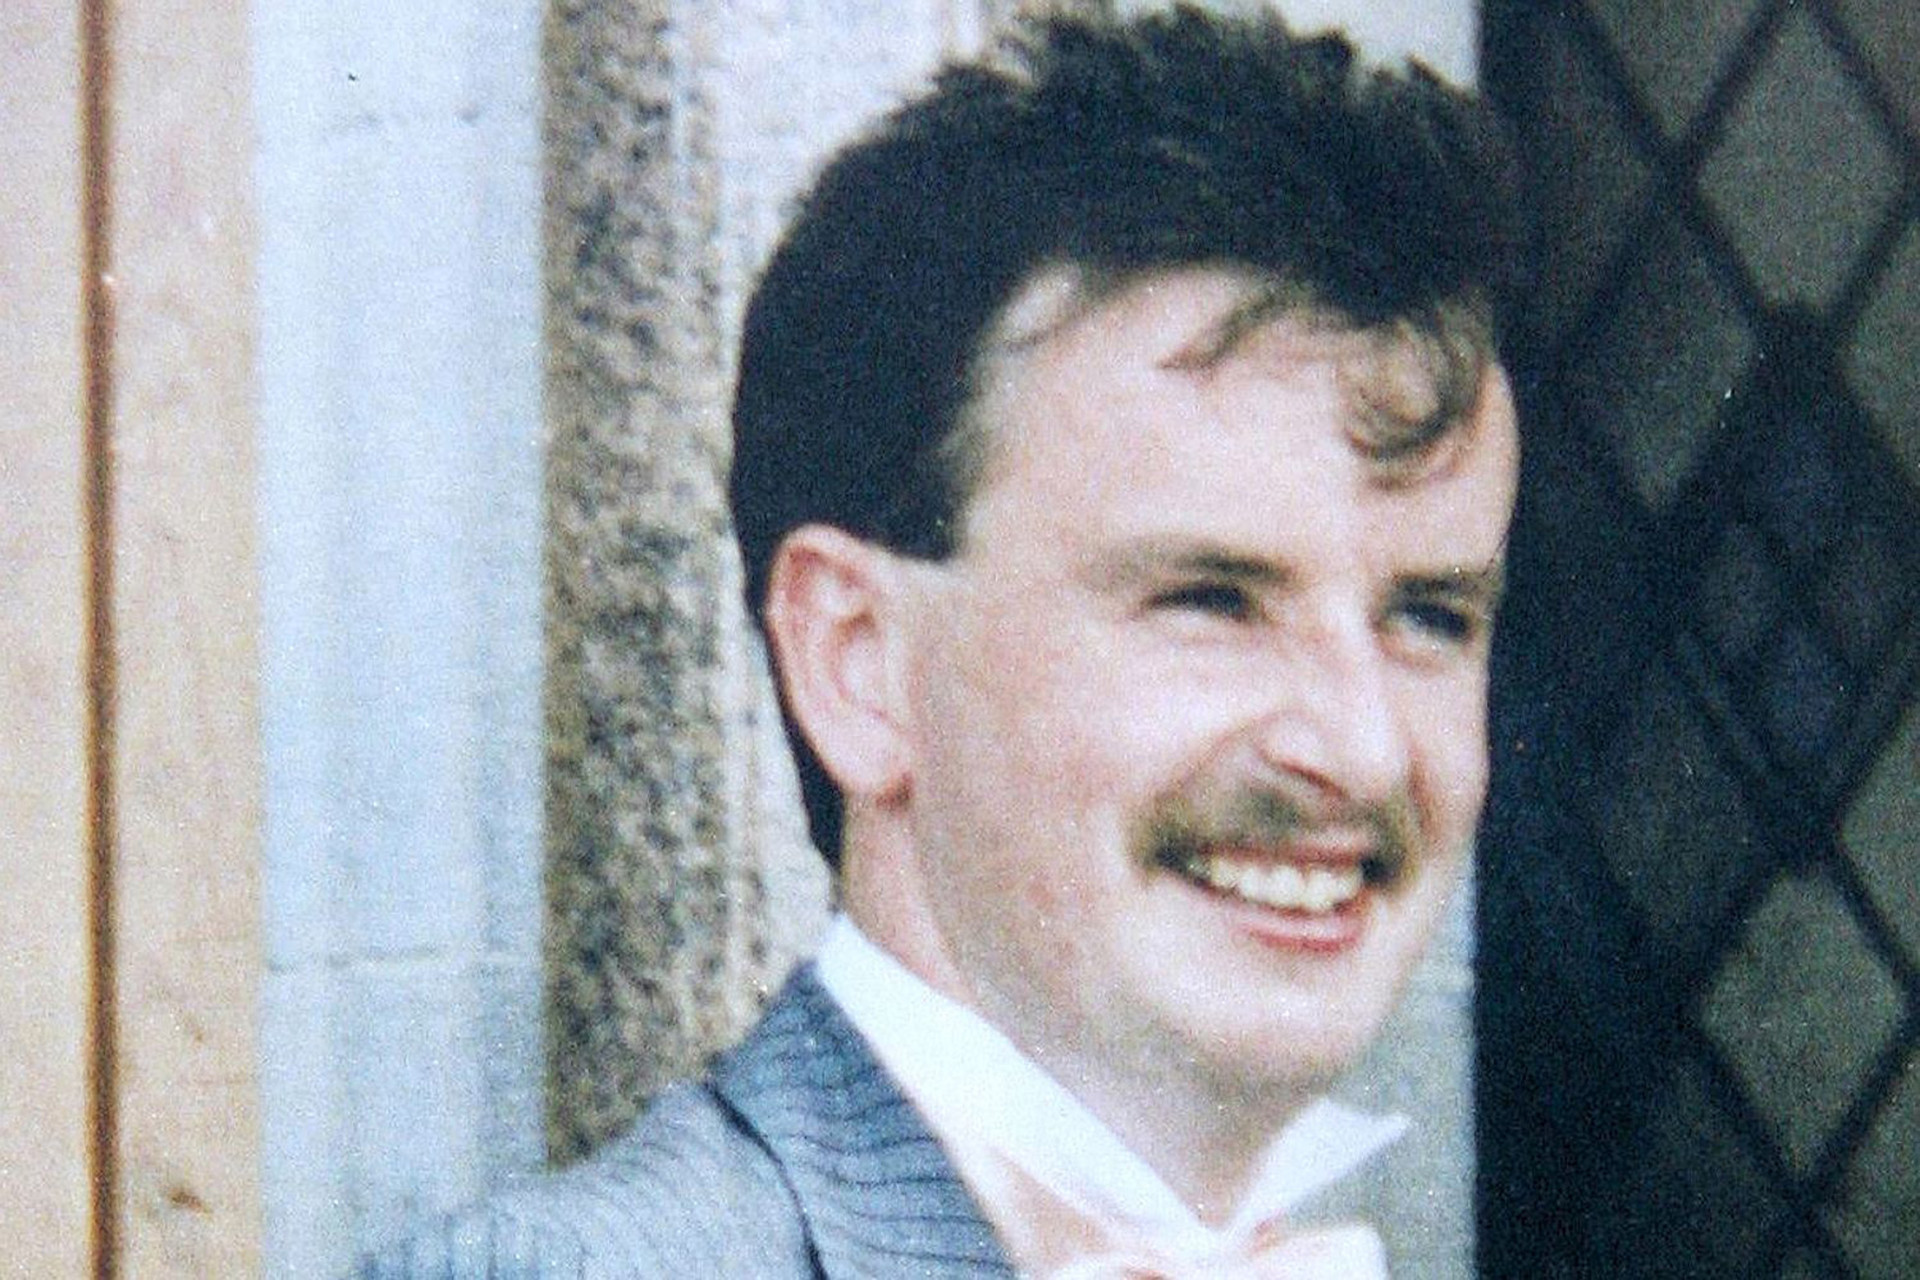 Trial of soldier for manslaughter of Aidan McAnespie to get underway